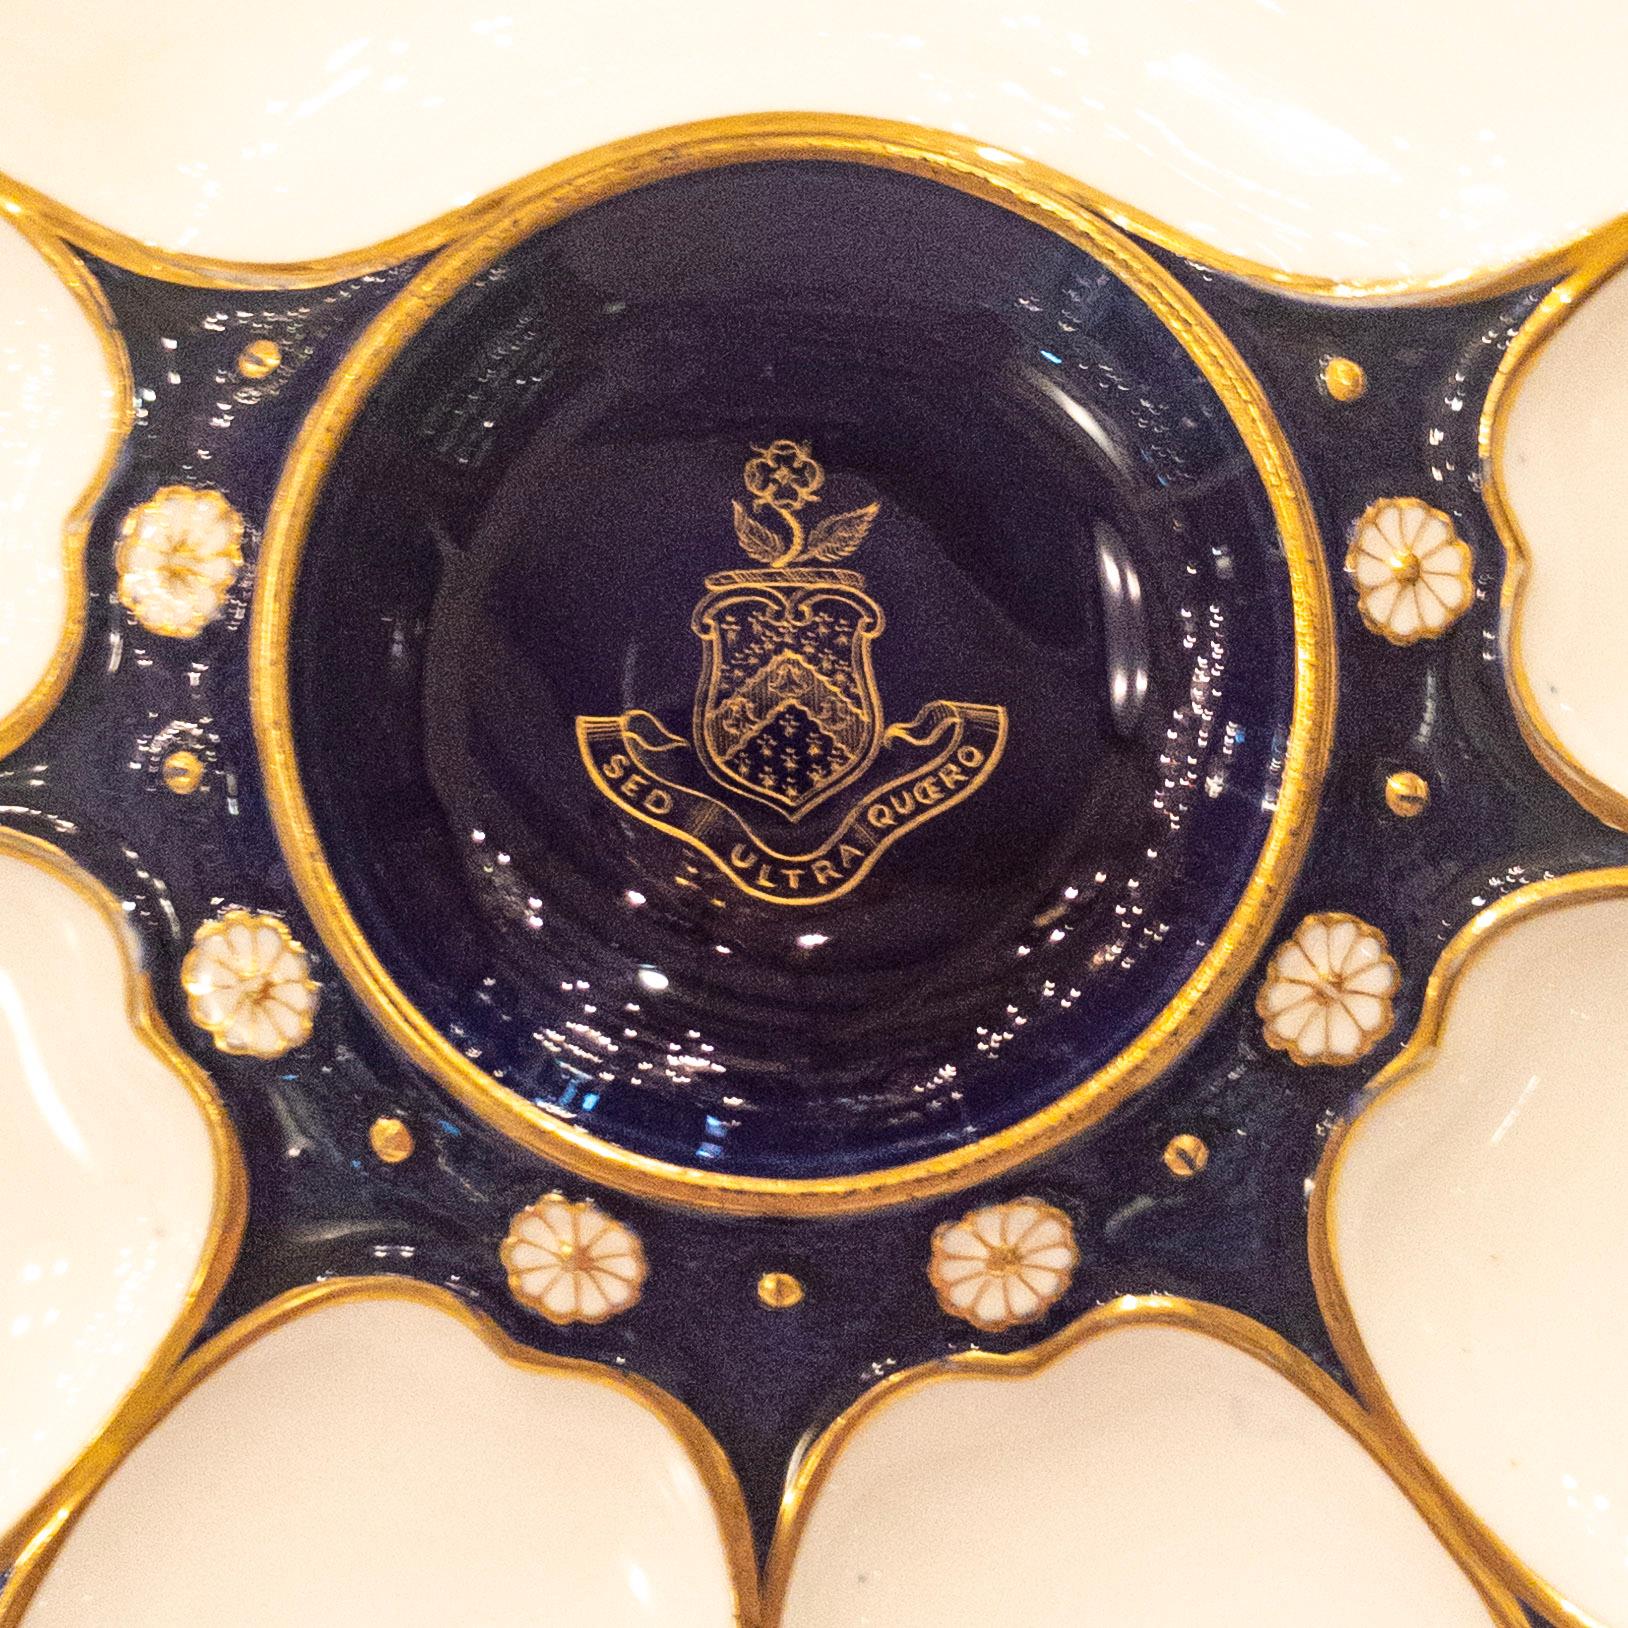 Porcelain Rare Antique English Minton Oyster Plate with Latin Crest and Large Cracker Well